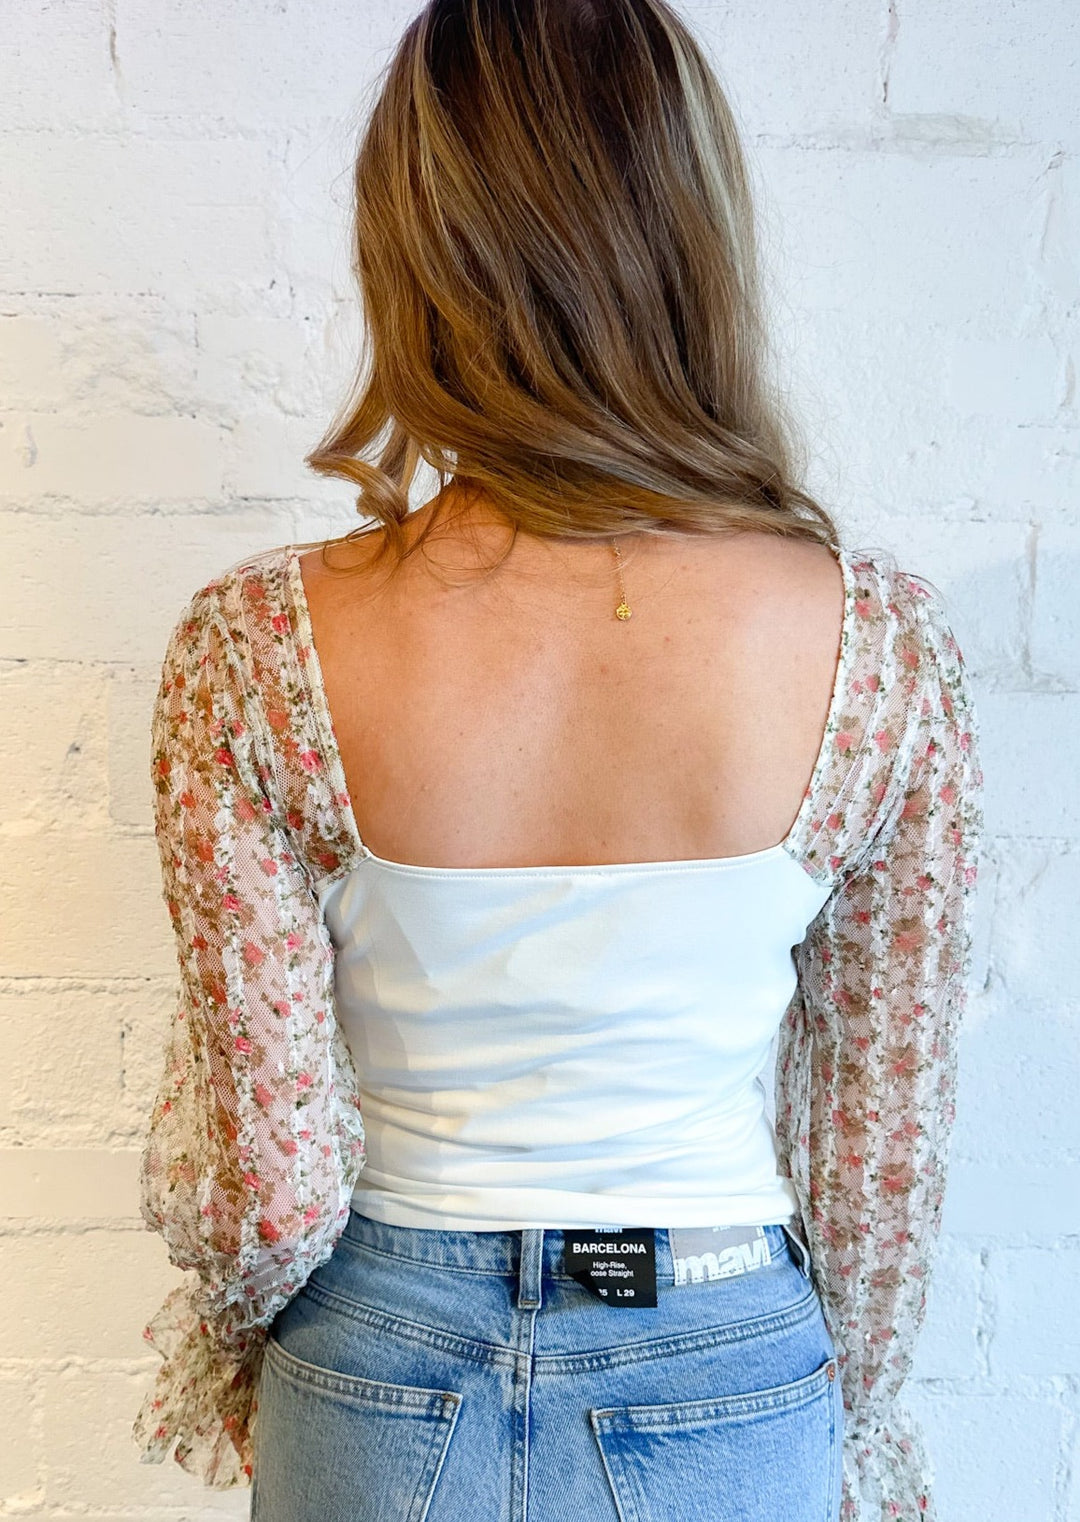 Free People Gimme Butterflies Long Sleeve Top, Tops, Free People, Adeline, dallas boutique, dallas texas, texas boutique, women's boutique dallas, adeline boutique, dallas boutique, trendy boutique, affordable boutique